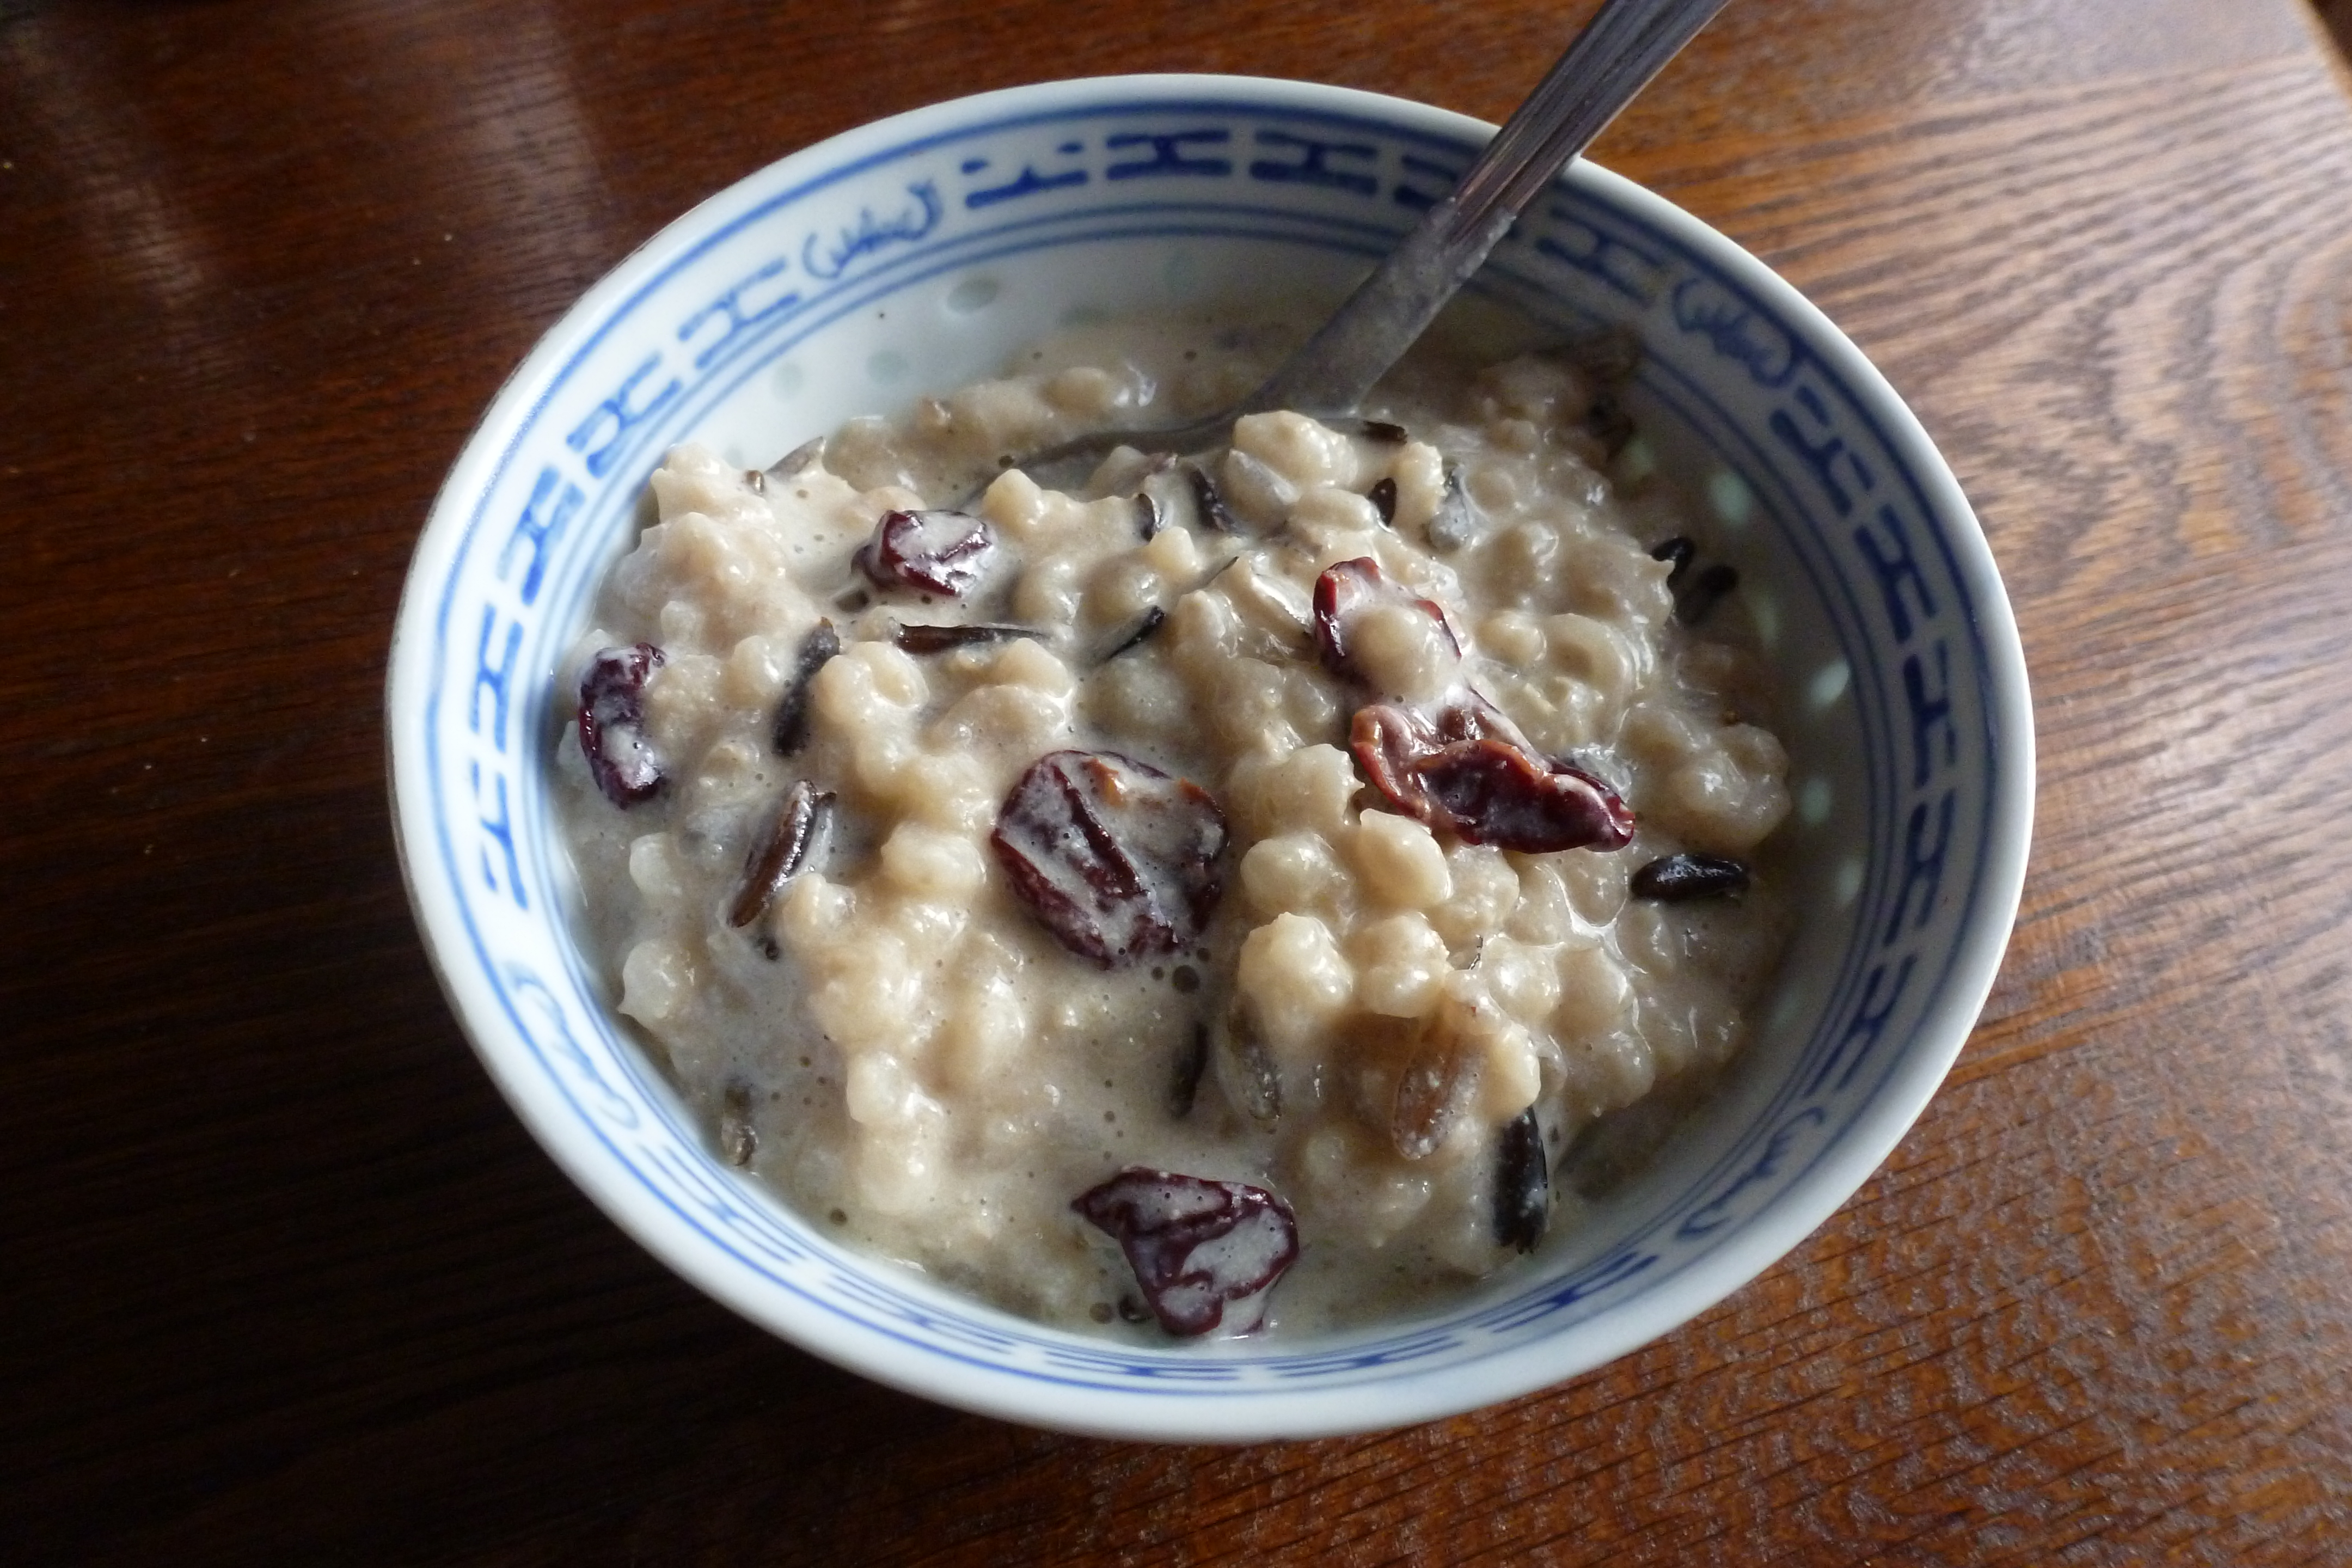 Wild rice and barley pudding, with dried evans cherries